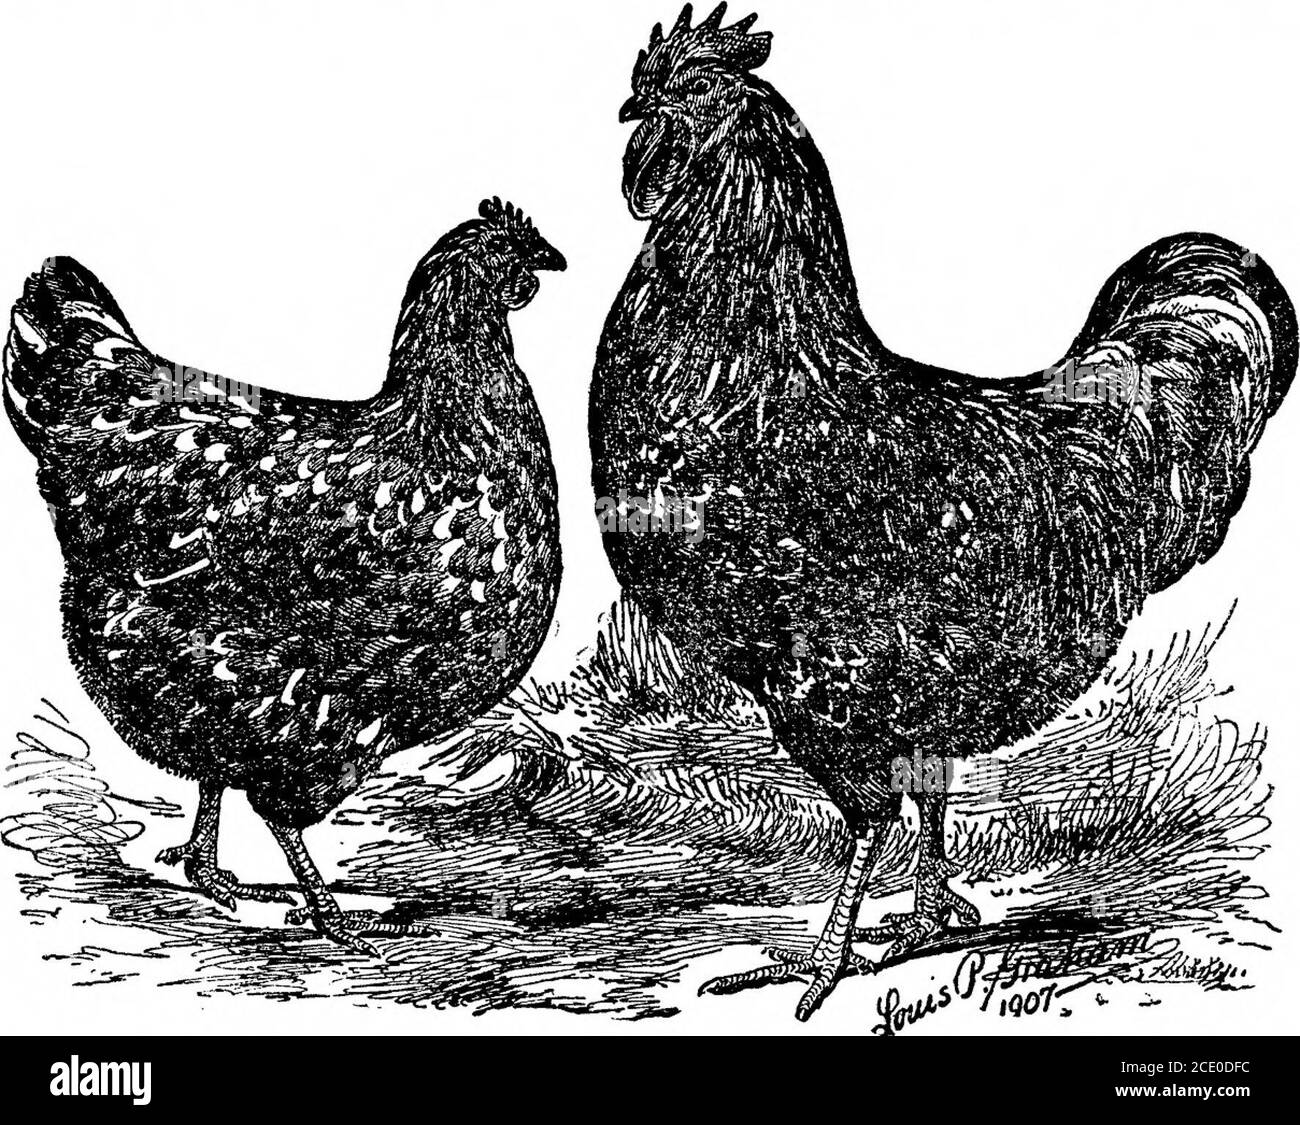 . Standard varieties of chickens . additions to the standard varieties, the former havingbeen admitted in 1901 and the latter in 1902. The color of the plum-age of the Partridge is similar to that of the Partridge Cochin, andthe color of the plumage of the Silver-penciled is similar to that ofthe Dark Brahma. The Columbian Wyandotte is the latest addition to the standardvarieties of this breed. In color and markings it is like the Light96476°—Bull. 51—13 2 10 Brahma, which, combined with the true Wyandotte shape, presentsa very beautiful bird. The color of the beak is horn, shading to yel-low Stock Photo